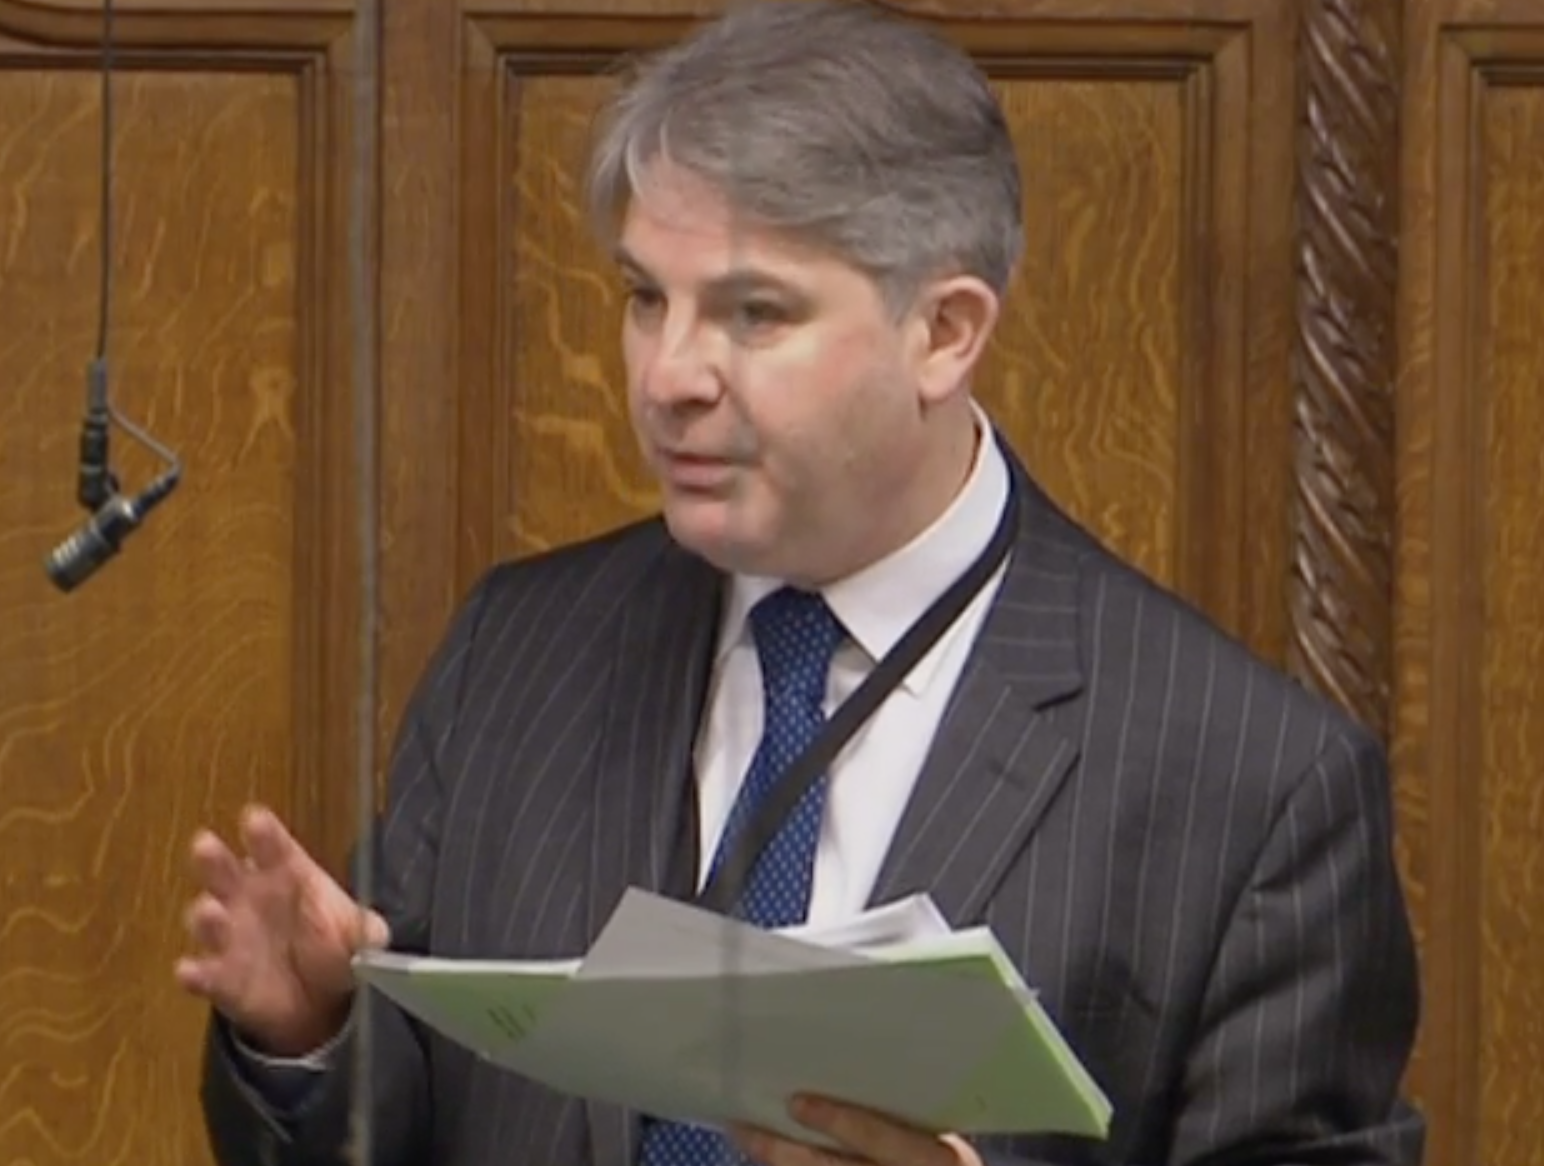 Philip Davies has registered receiving £4,354 in tickets and hospitality since March